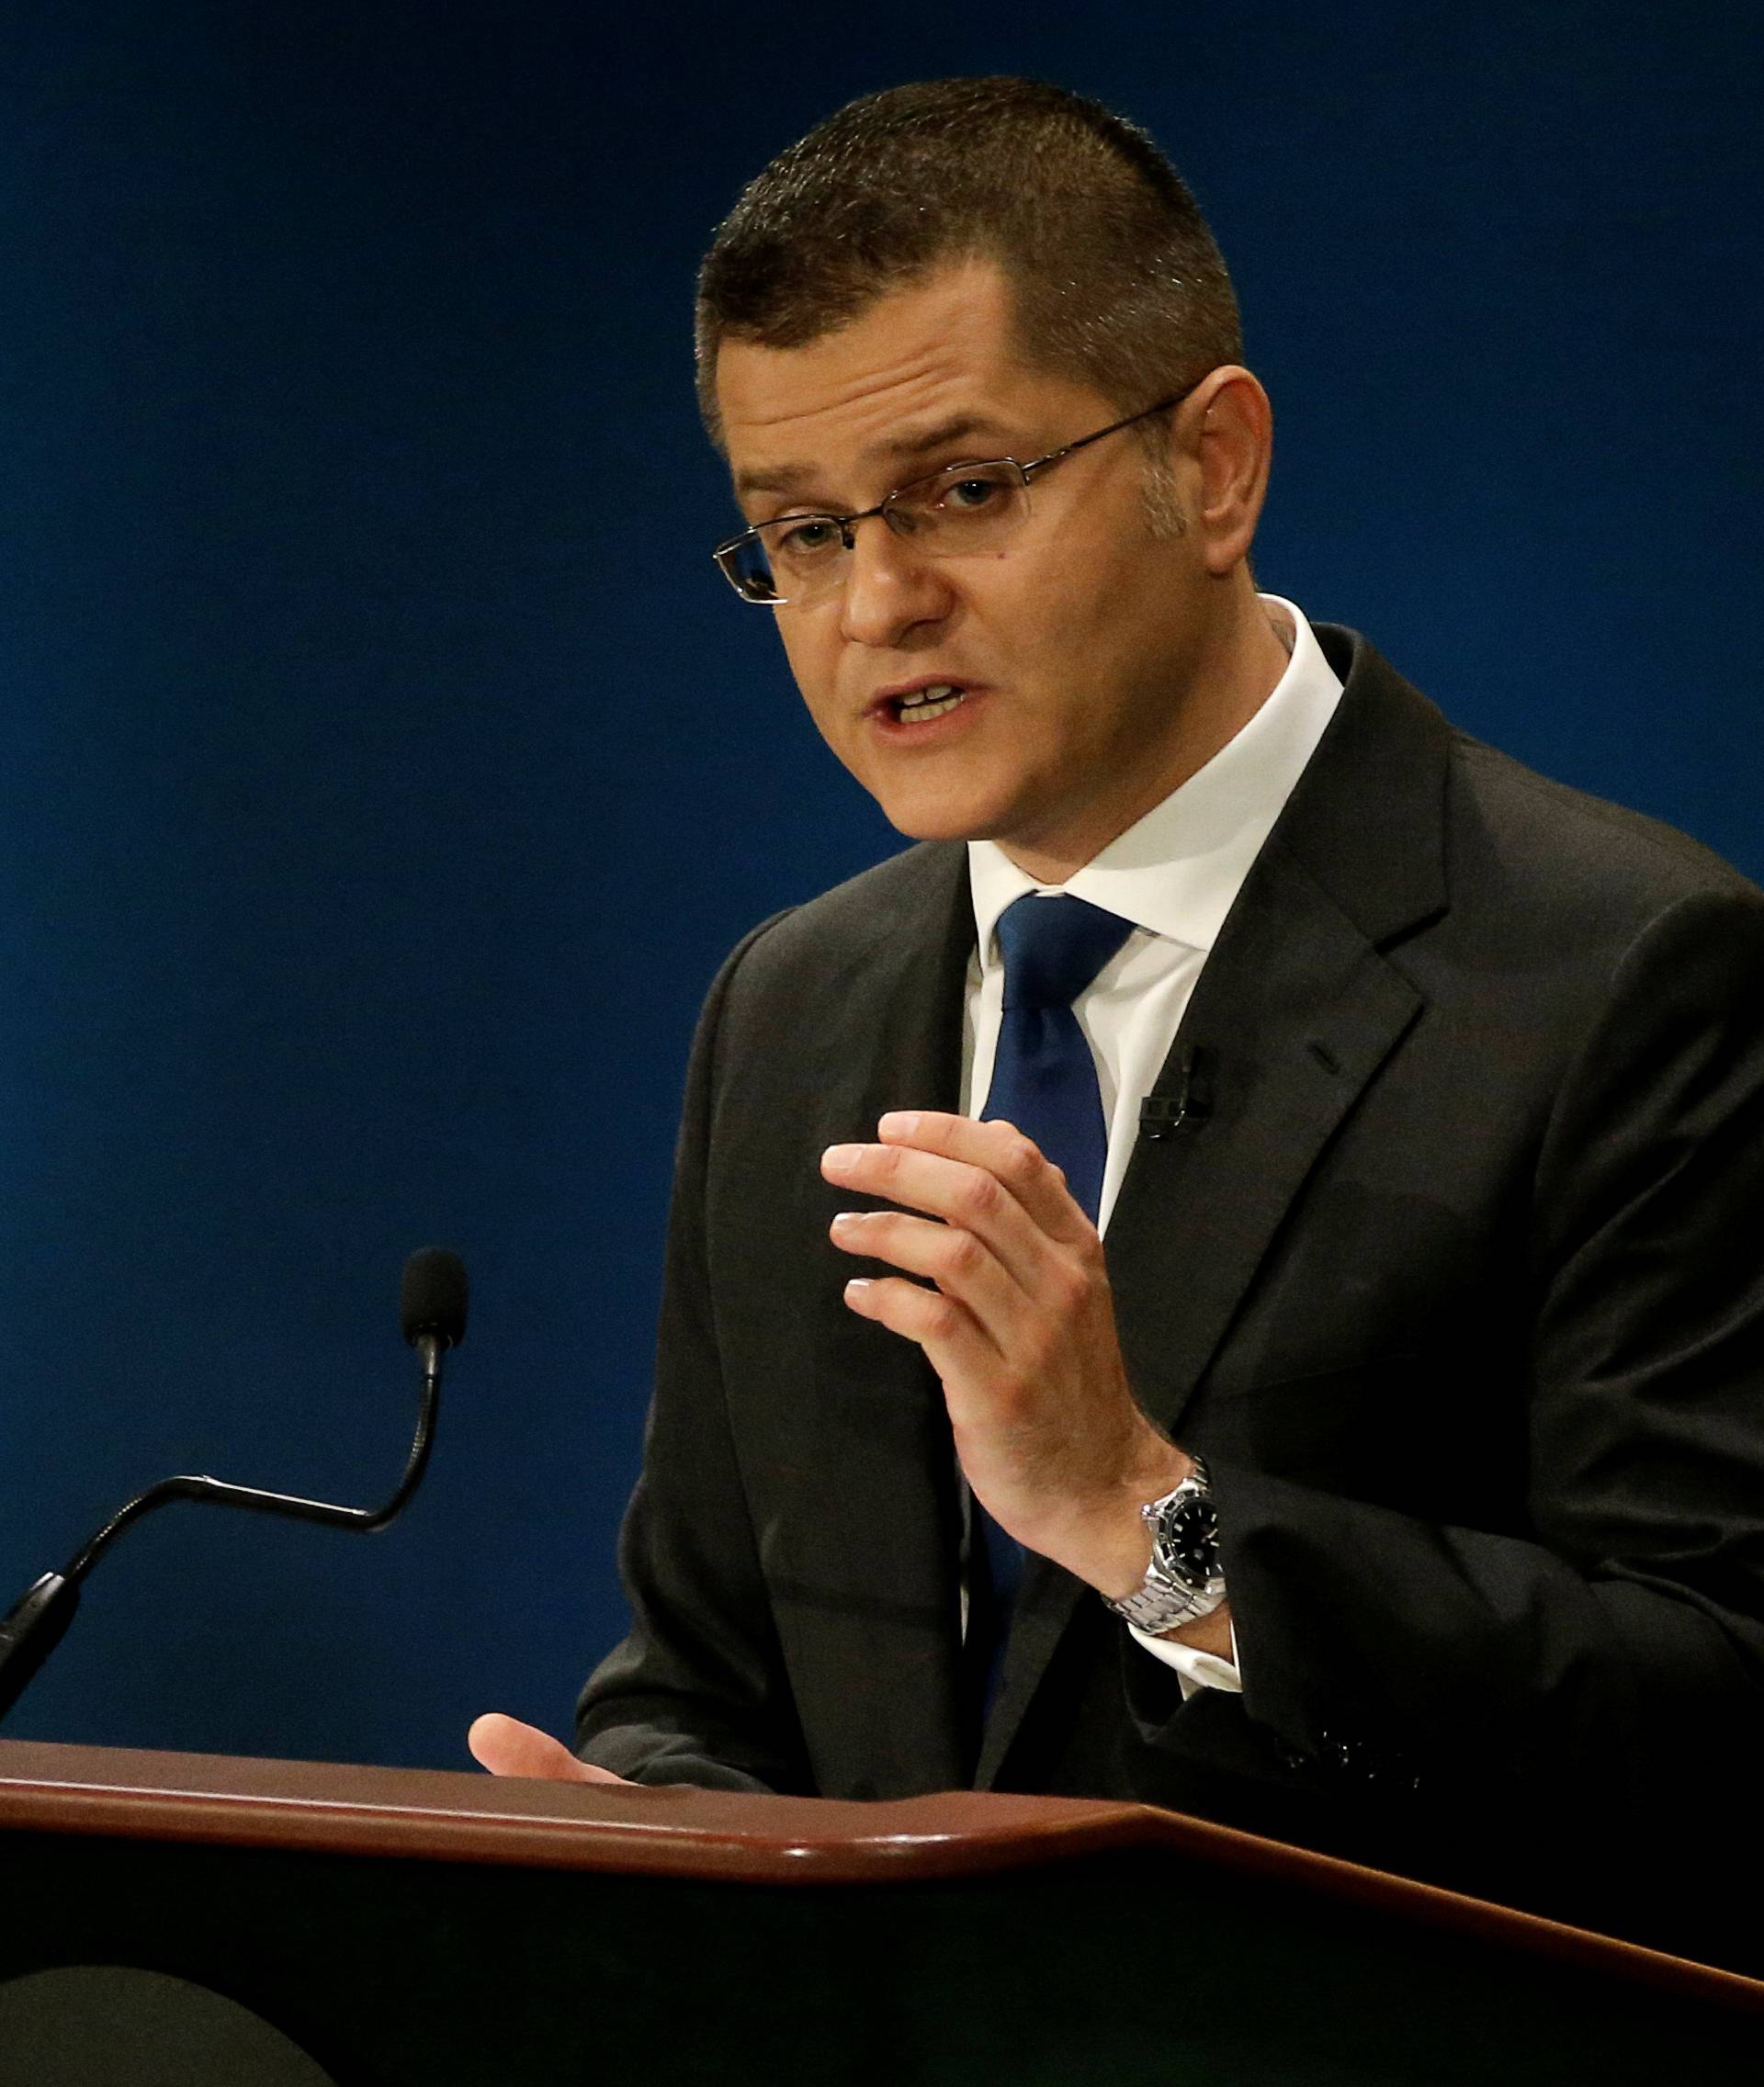 Former Serbian Foreign Minister Vuk Jeremic speaks during a debate in the United Nations General Assembly between candidates vying to be the next U.N. Secretary General at U.N. headquarters in New York